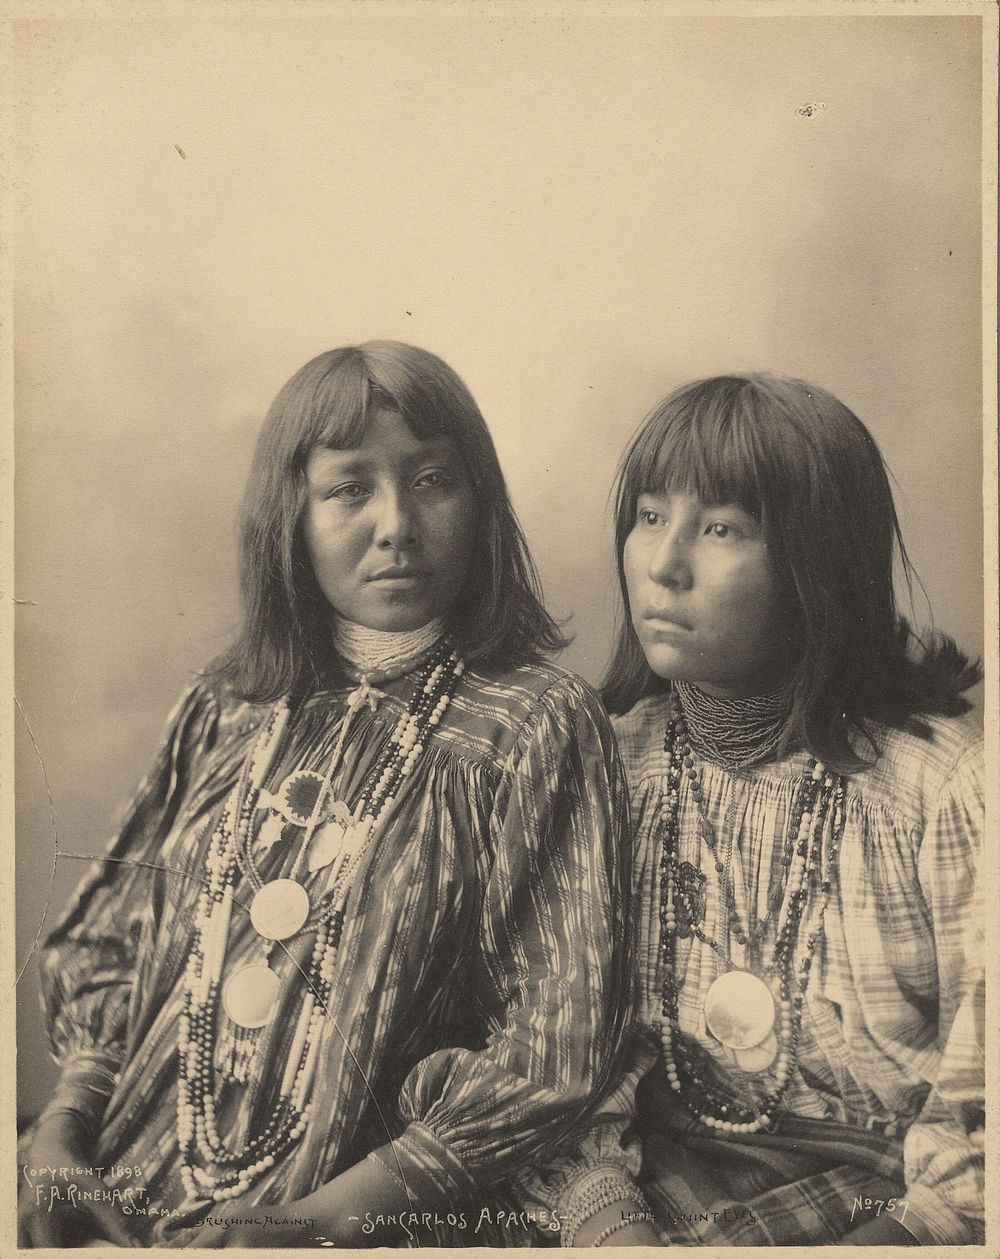 Brushing Against and Little Squint Eyes, San Carlos Apaches by Adolph F Muhr and Frank A Rinehart